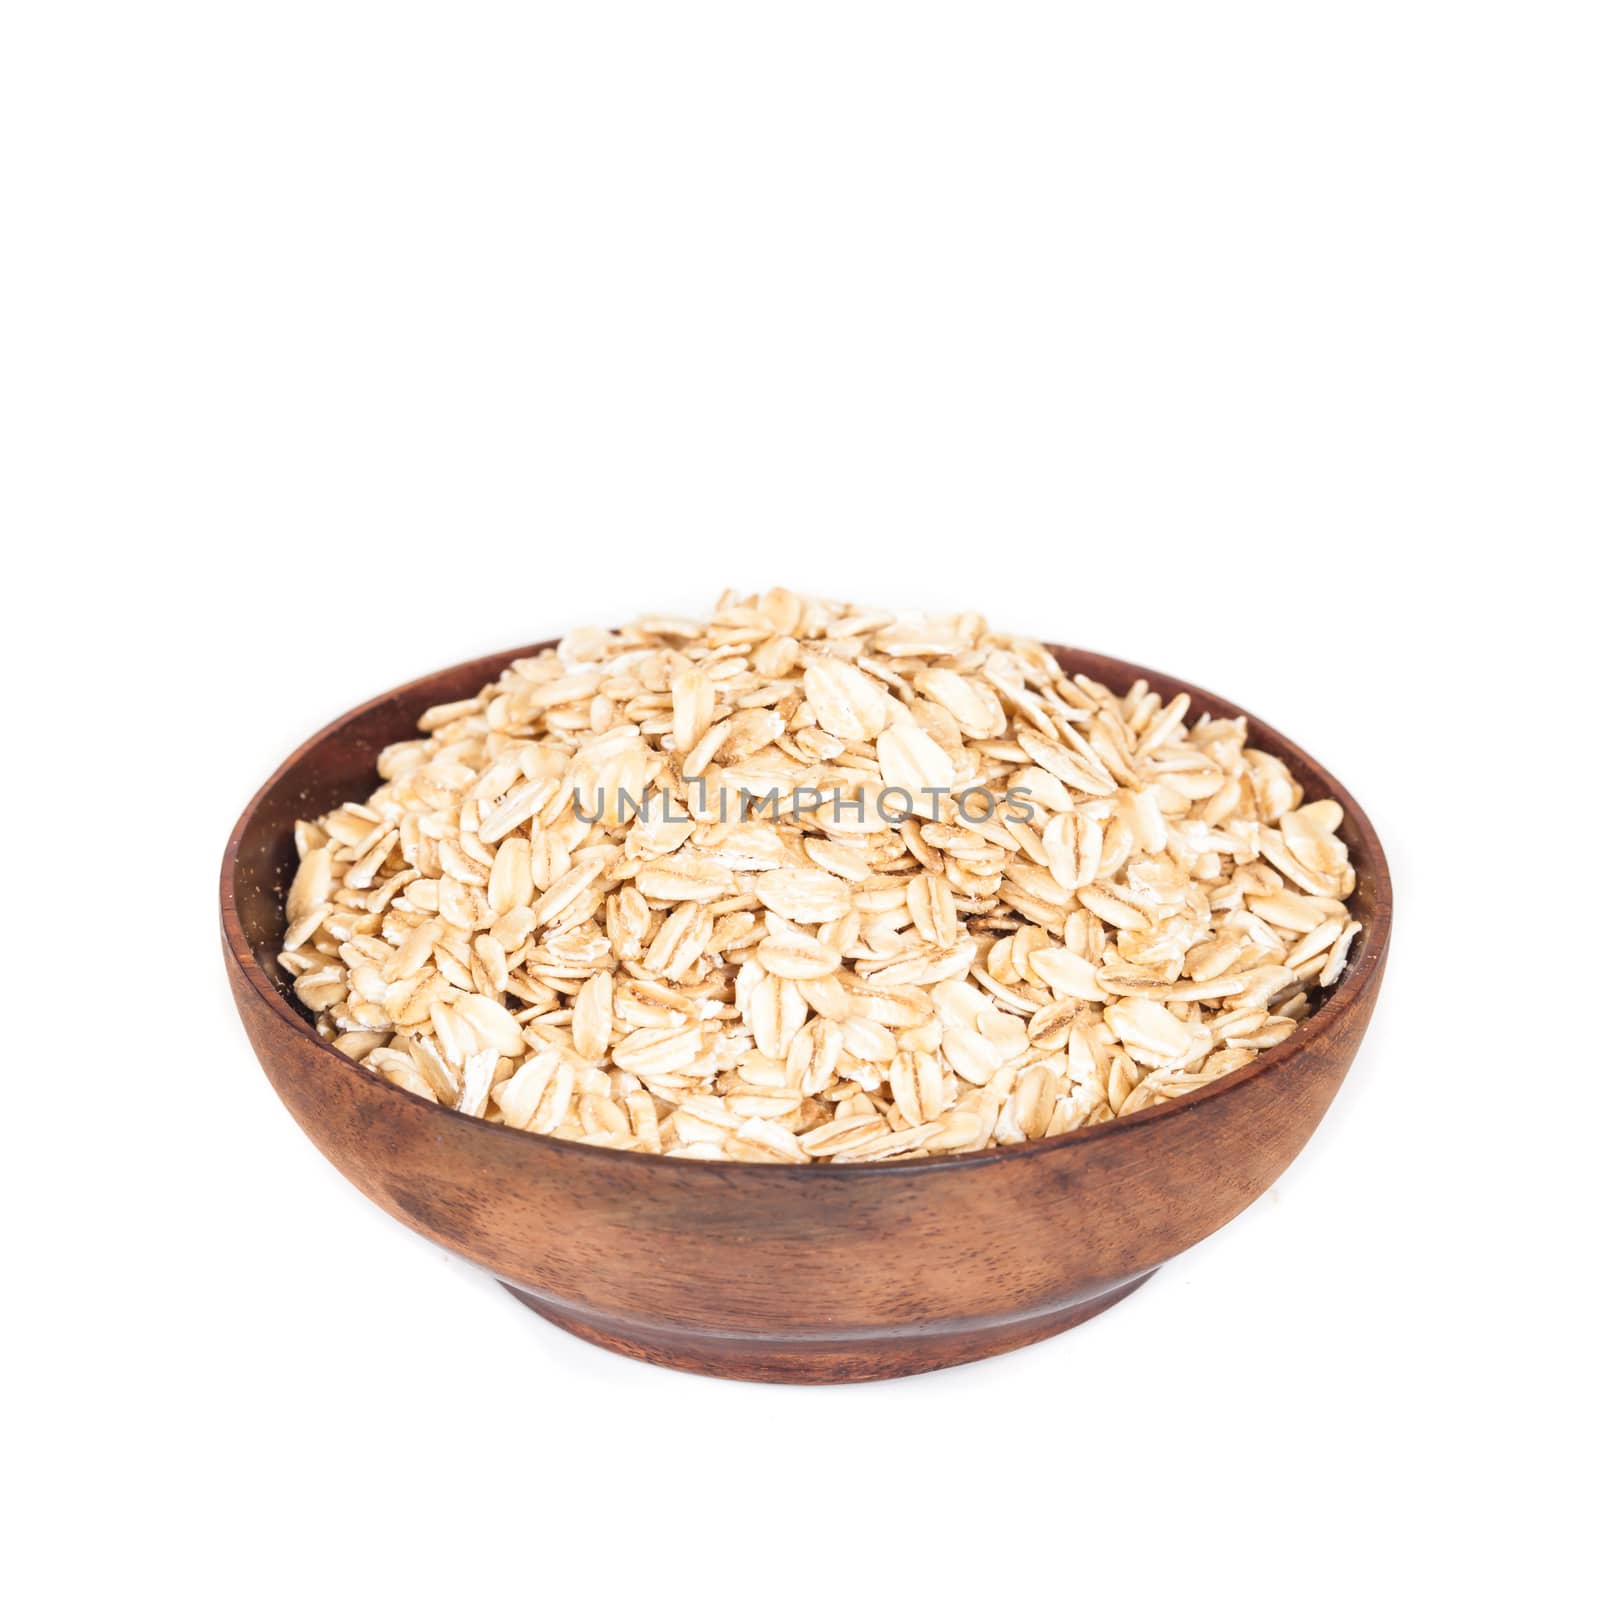 Wooden bowl with oats flakes pile on white background. by amnarj2006